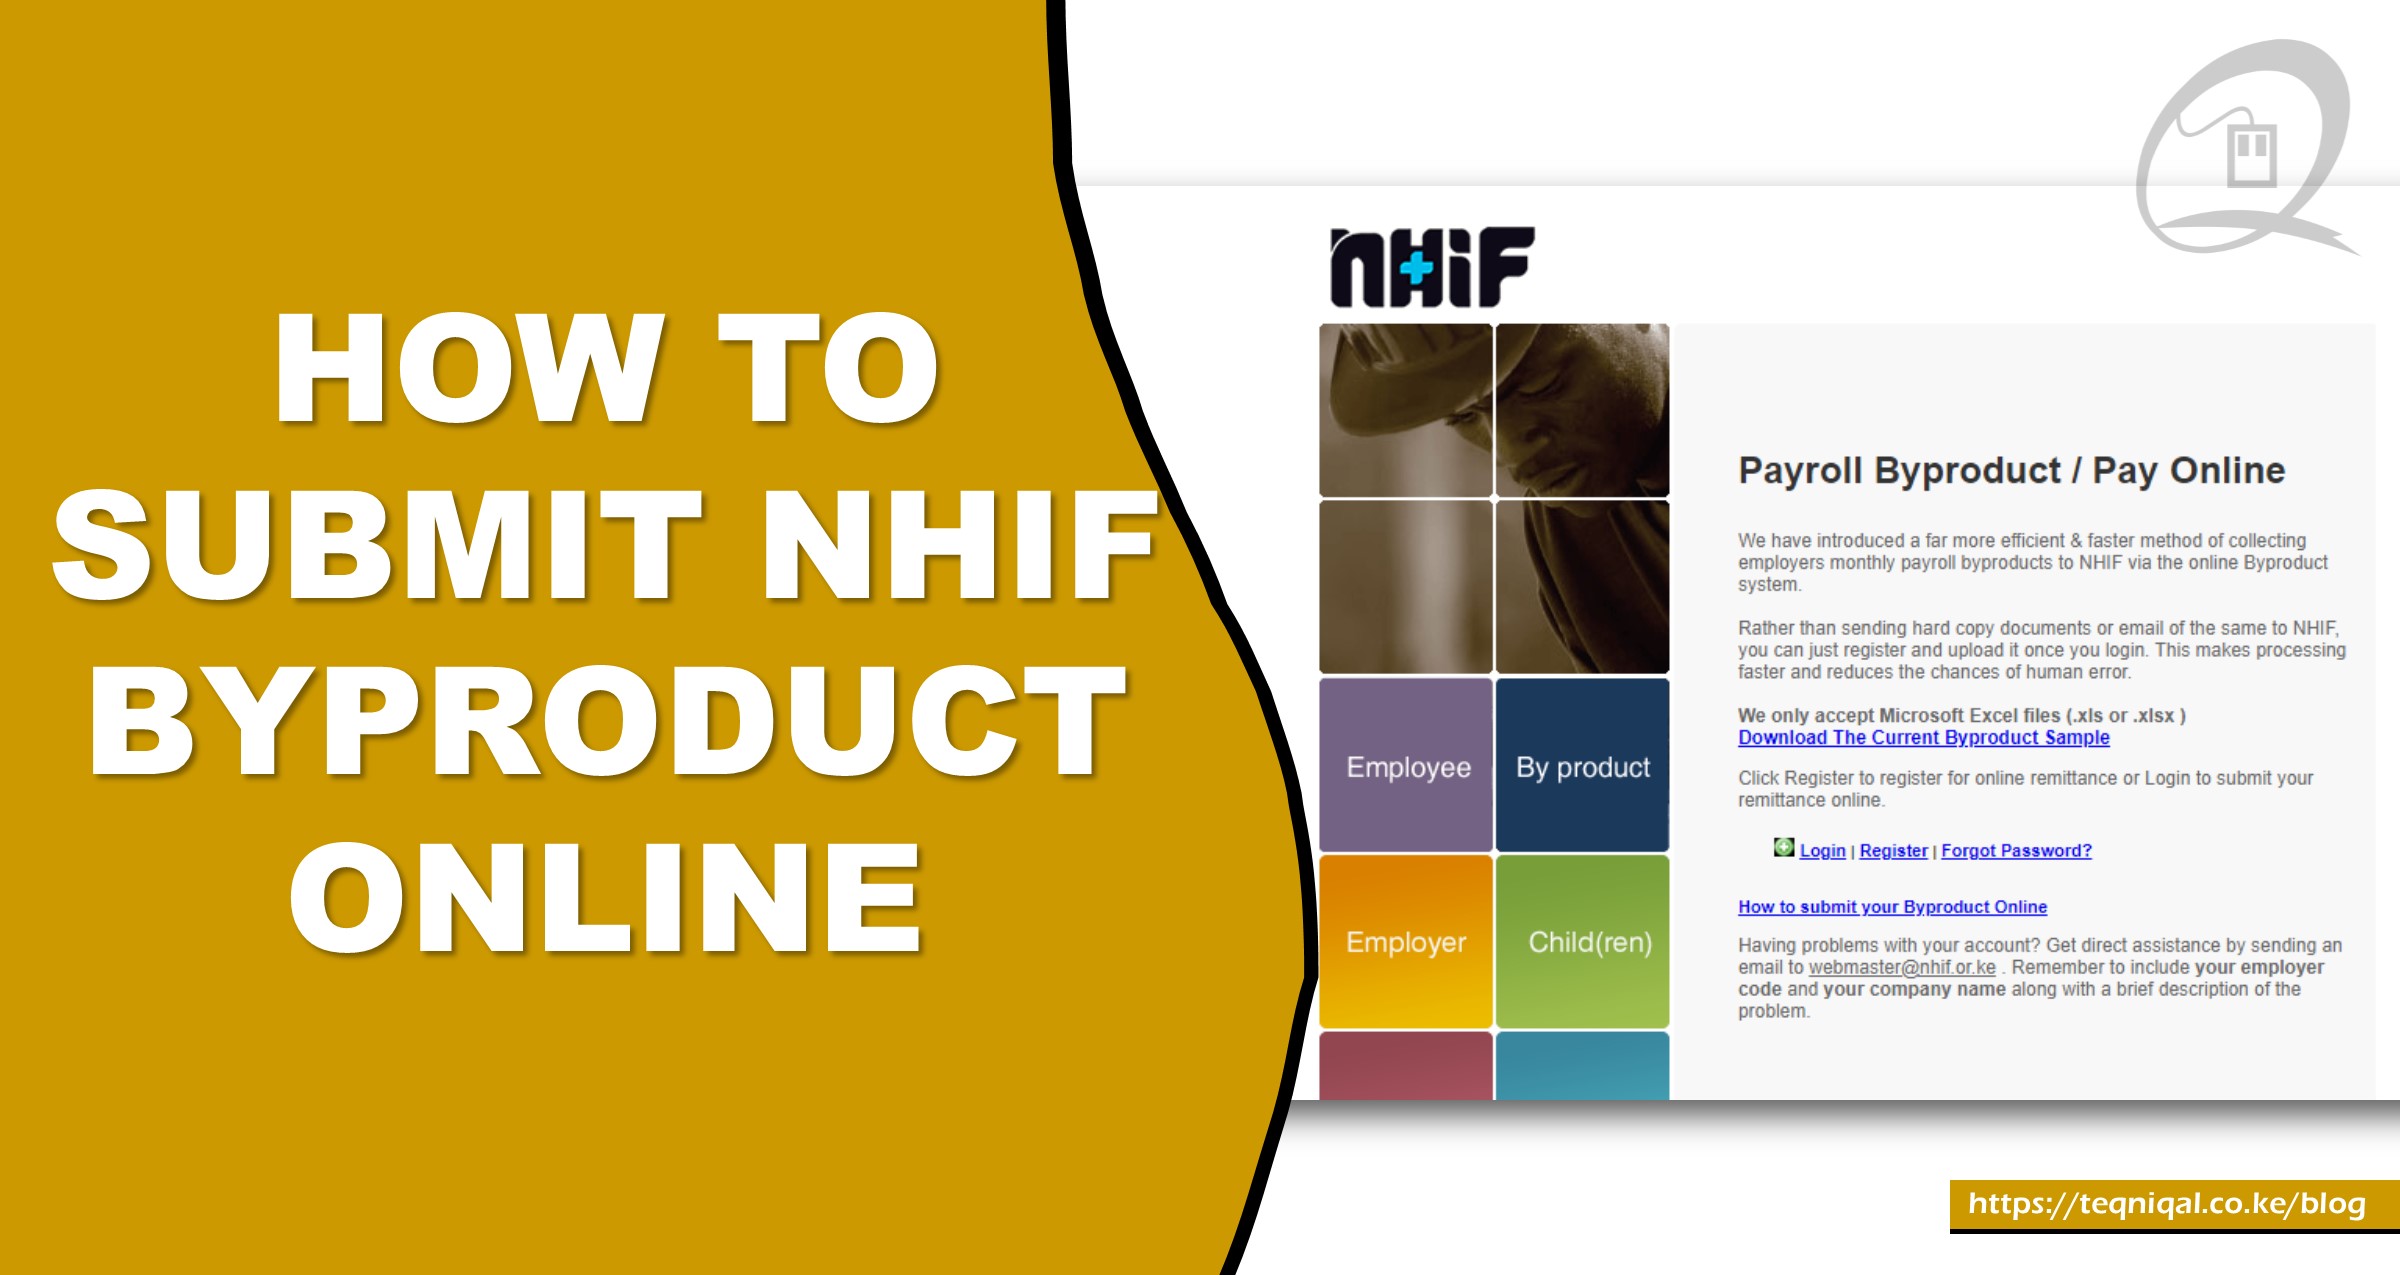 How to Submit NHIF Byproduct Online